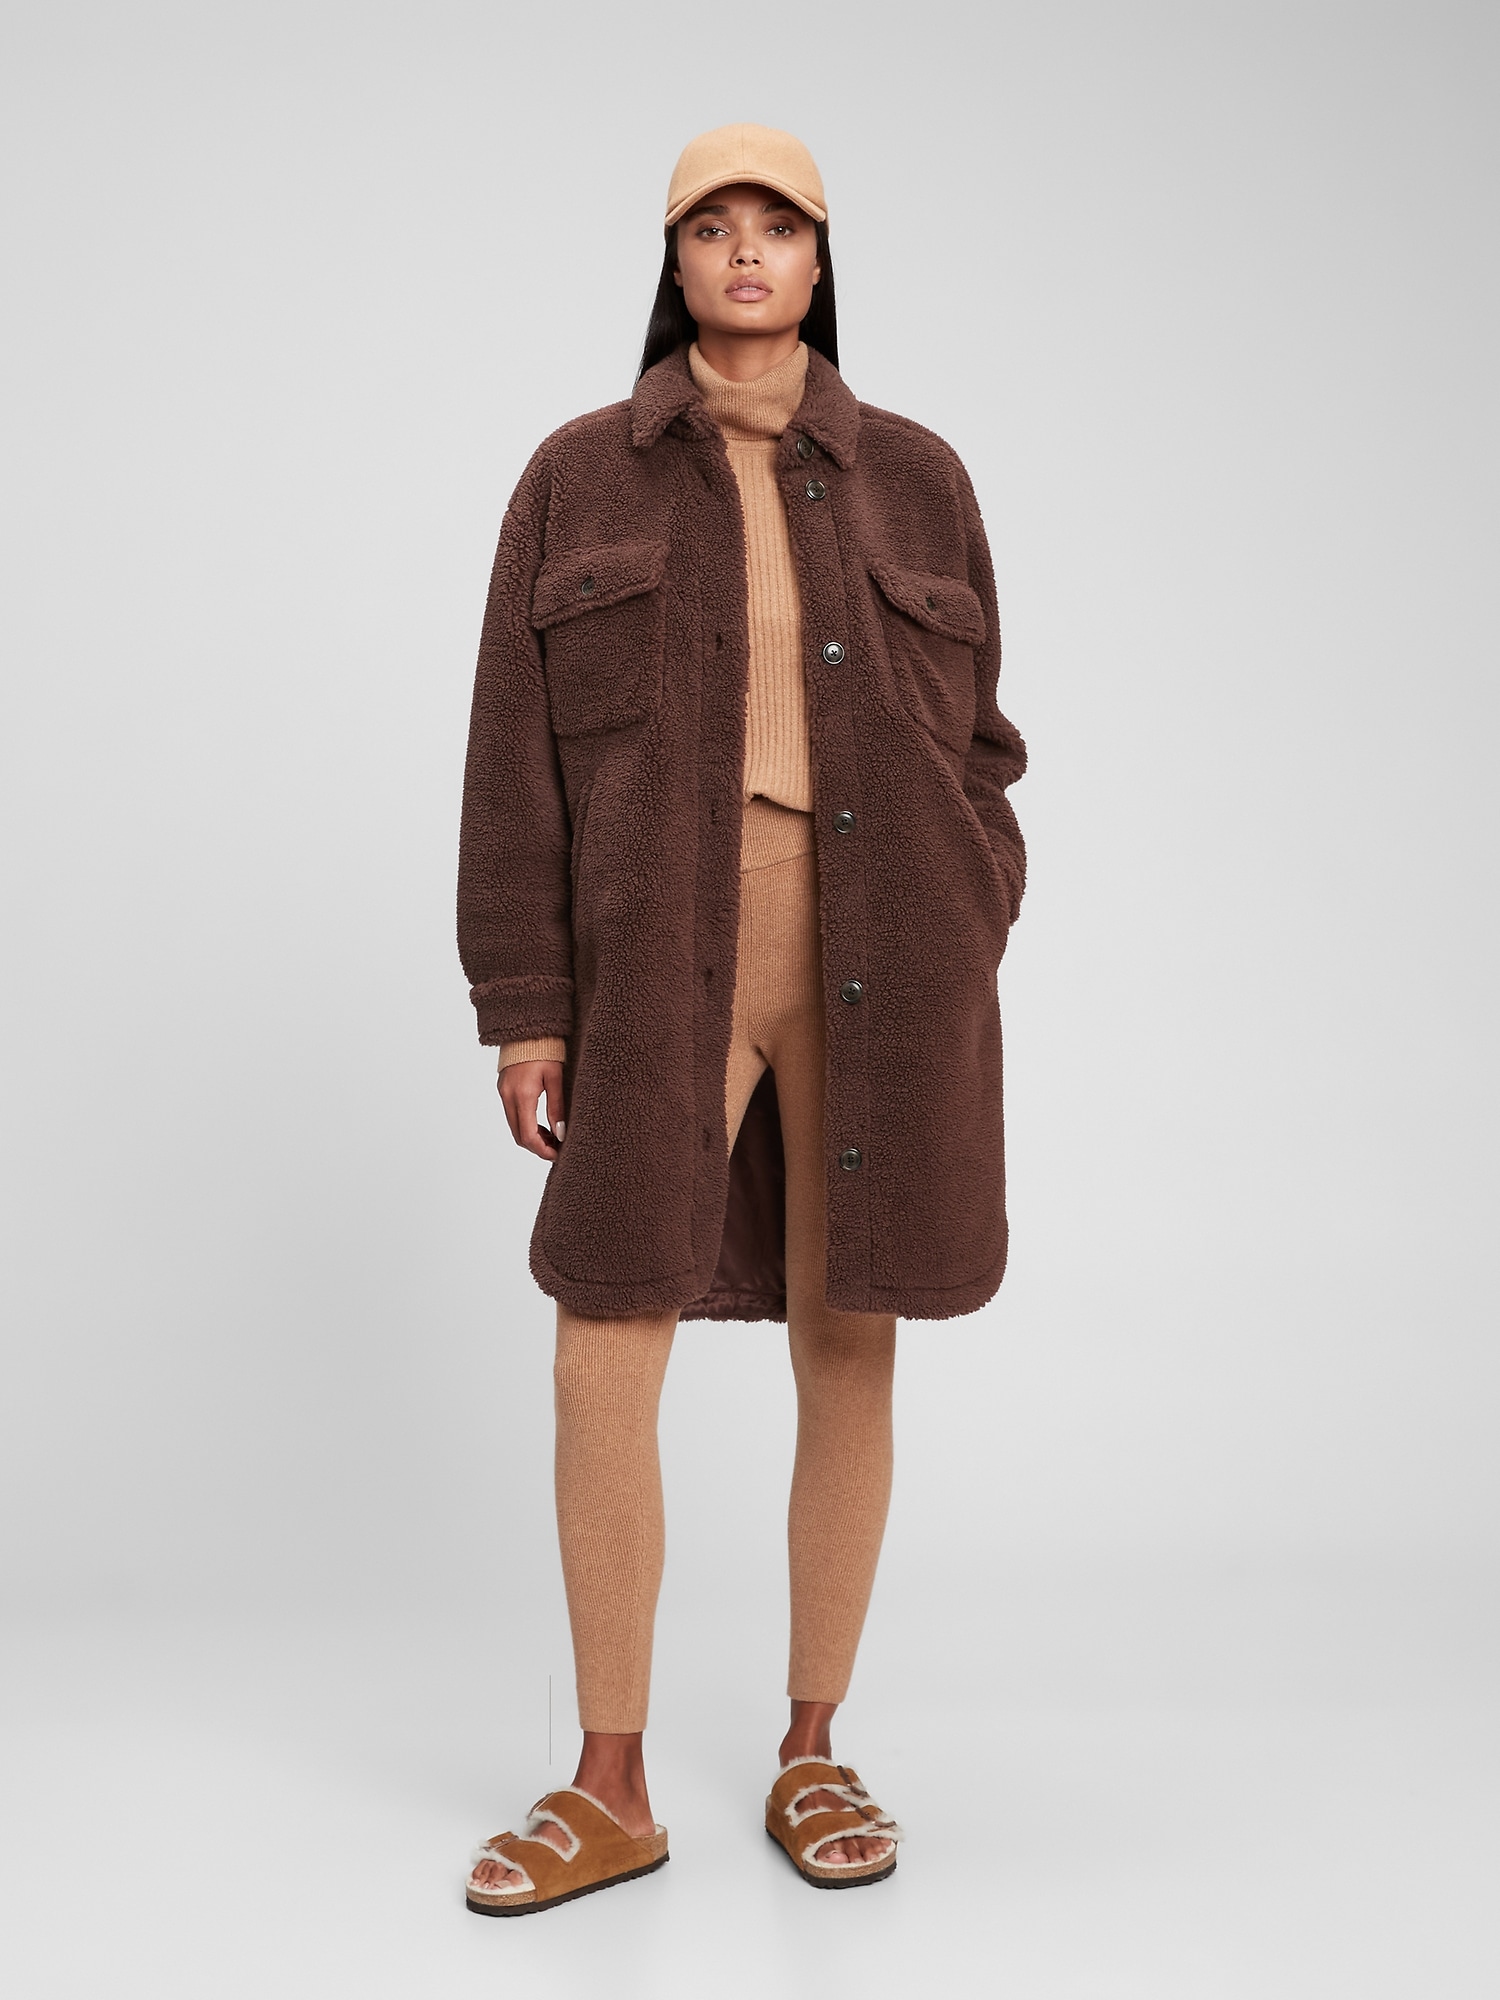 This $42 Oversized Sherpa Coat Has 5,000+ Five-Star Reviews on